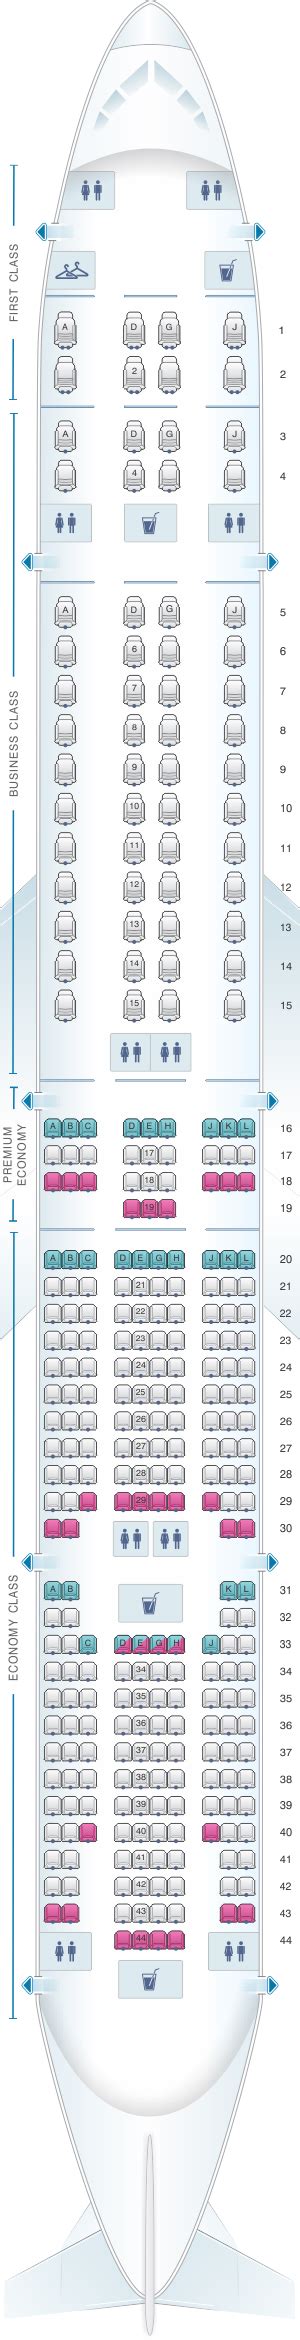 Boeing 777 300er seat map american airlines. American Airlines Boeing 777 300er Seat Map American Airlines Reviews Seating Charts Not sure what plane you're on? Click here to search for a specific flight, set aircraft change alerts, schedule change alerts, and more. American Airlines Boeing 777-300ER Seat Reviews 1A 2A 1G 2G 1D 2D 1J 2J 3A 4A 3G 4G 3D 4D 3J 4J 5A 6A 7A 8A 9A 10A 11A 12A 13A 